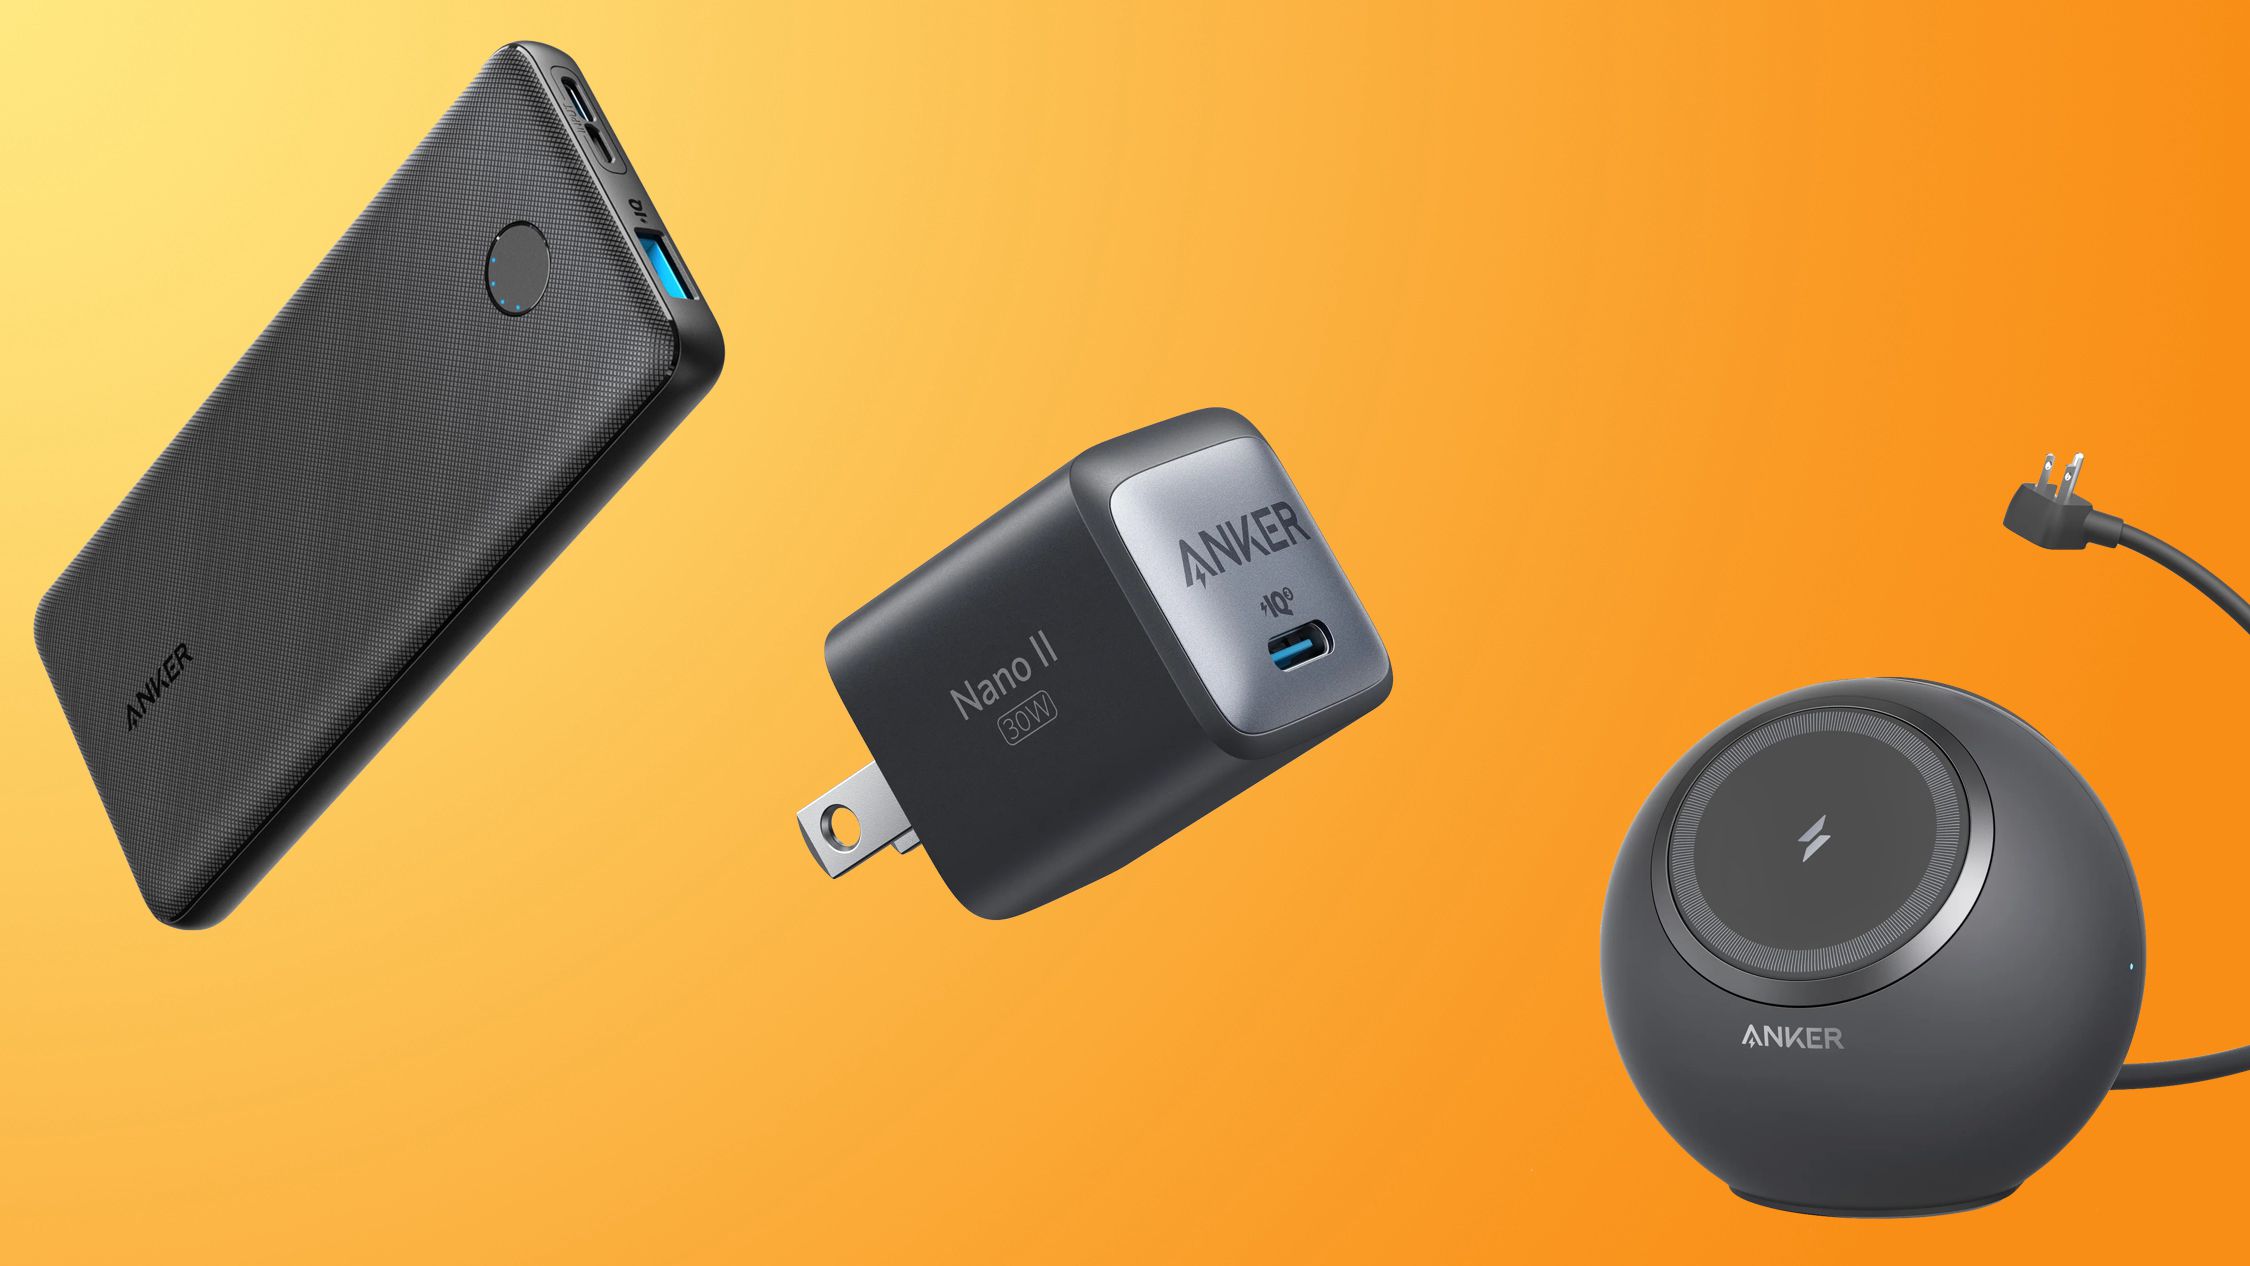 Deals: Anker's New Sale Has Up to 25% Off Accessories, While Eufy Discounts Find My-Compatible Smart Trackers - macrumors.com